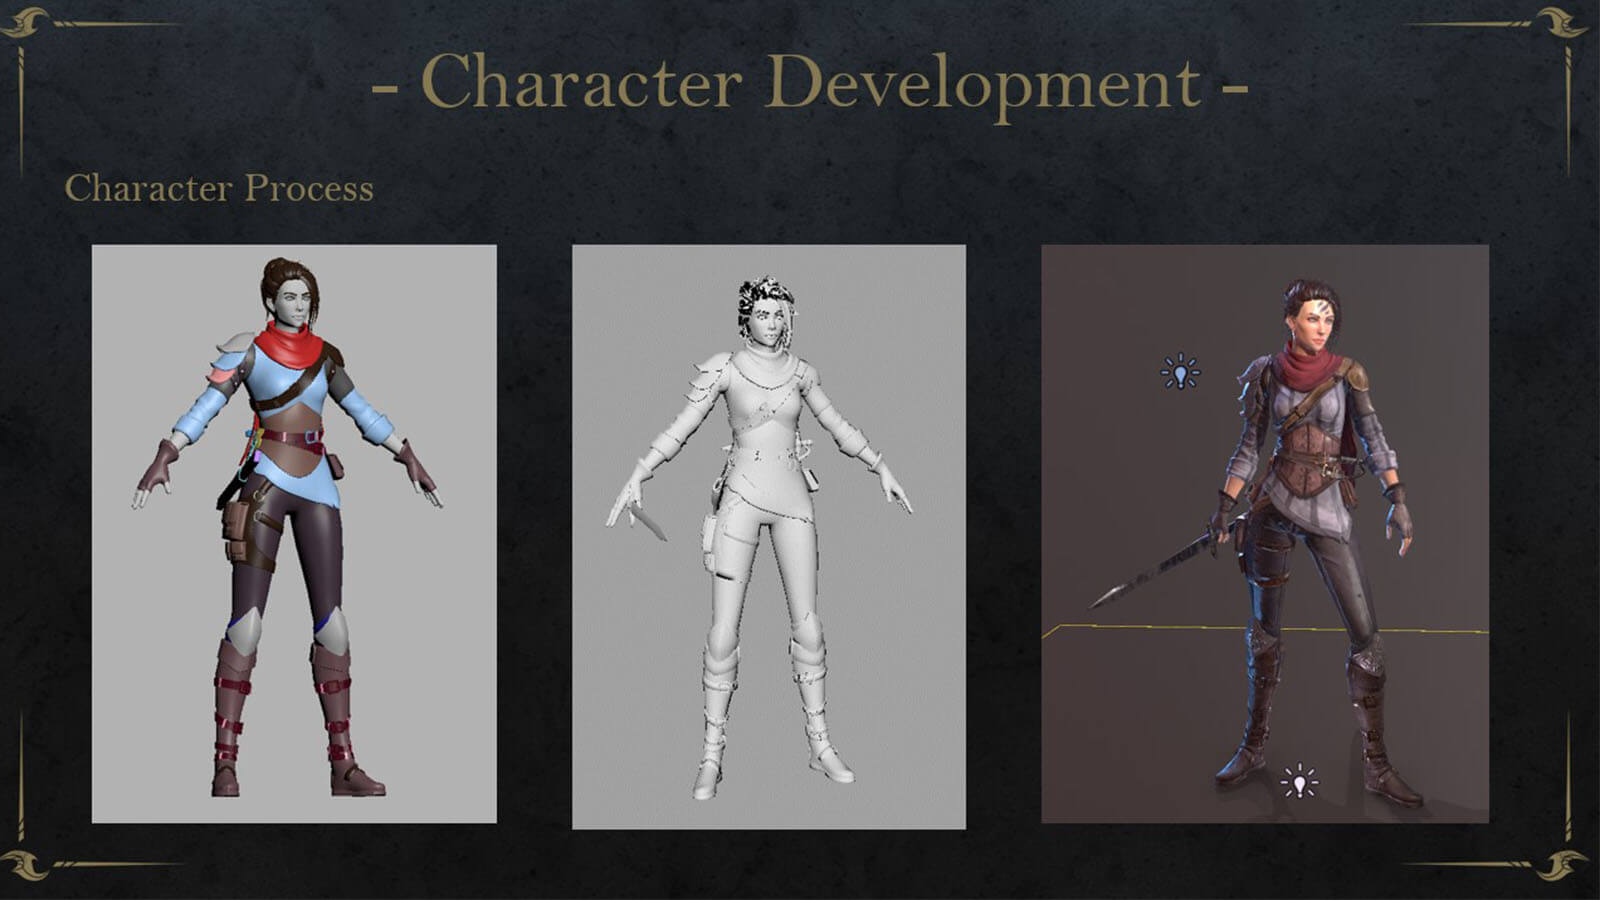 Three female adventurer character model process images showing them from start to finish